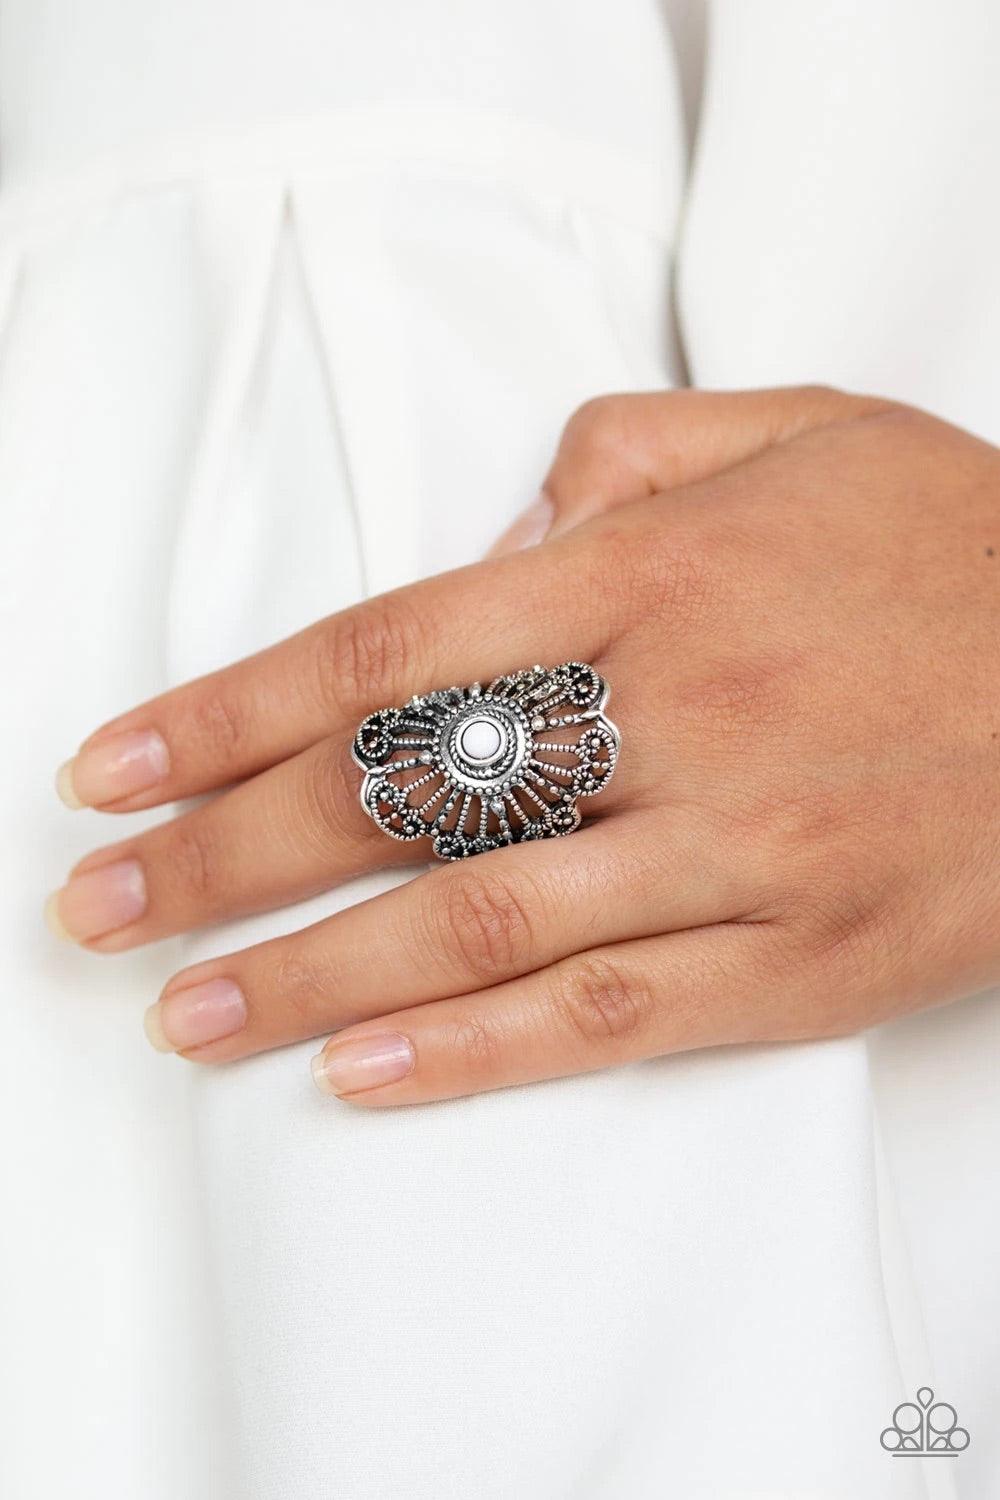 Paparazzi Accessories Adrift ~White A dainty white bead is pressed into a round silver frame swirling with studded details for a whimsical vibe. Features a stretchy band for a flexible fit. Sold as one individual ring. Jewelry